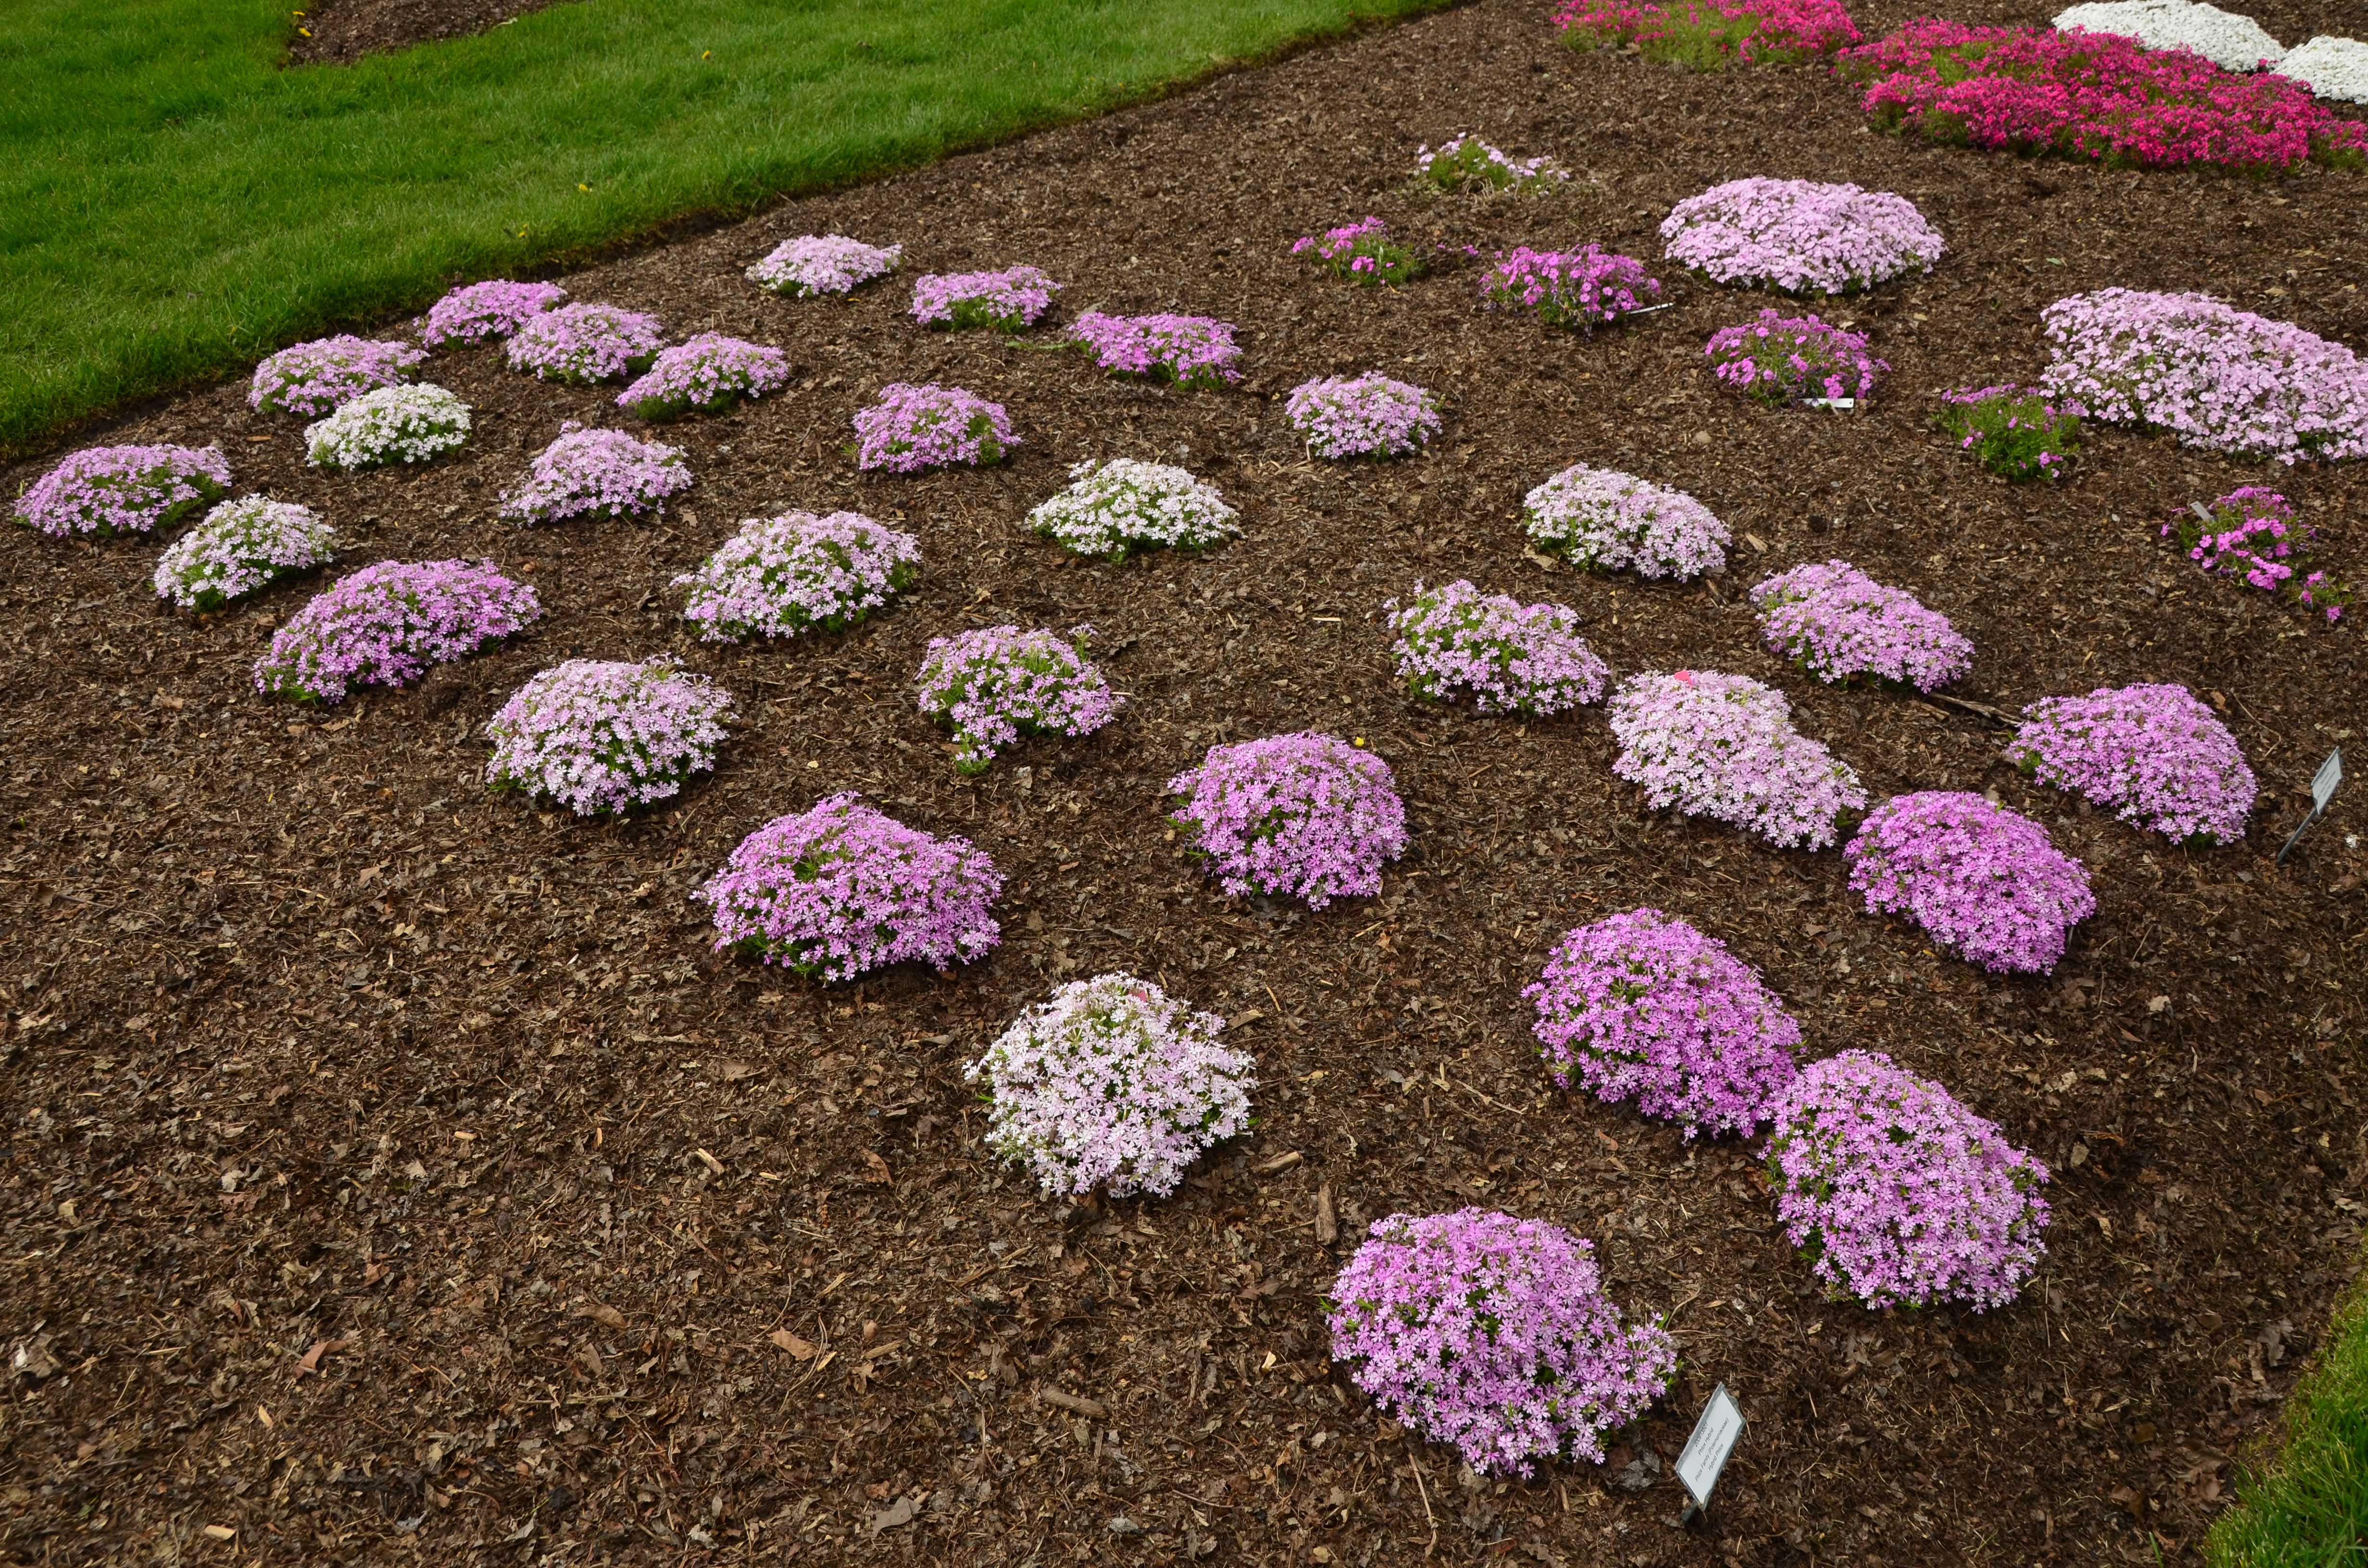 images/plants/phlox/phl-perfectly-puzzling/phl-perfectly-puzzling-0010.jpg